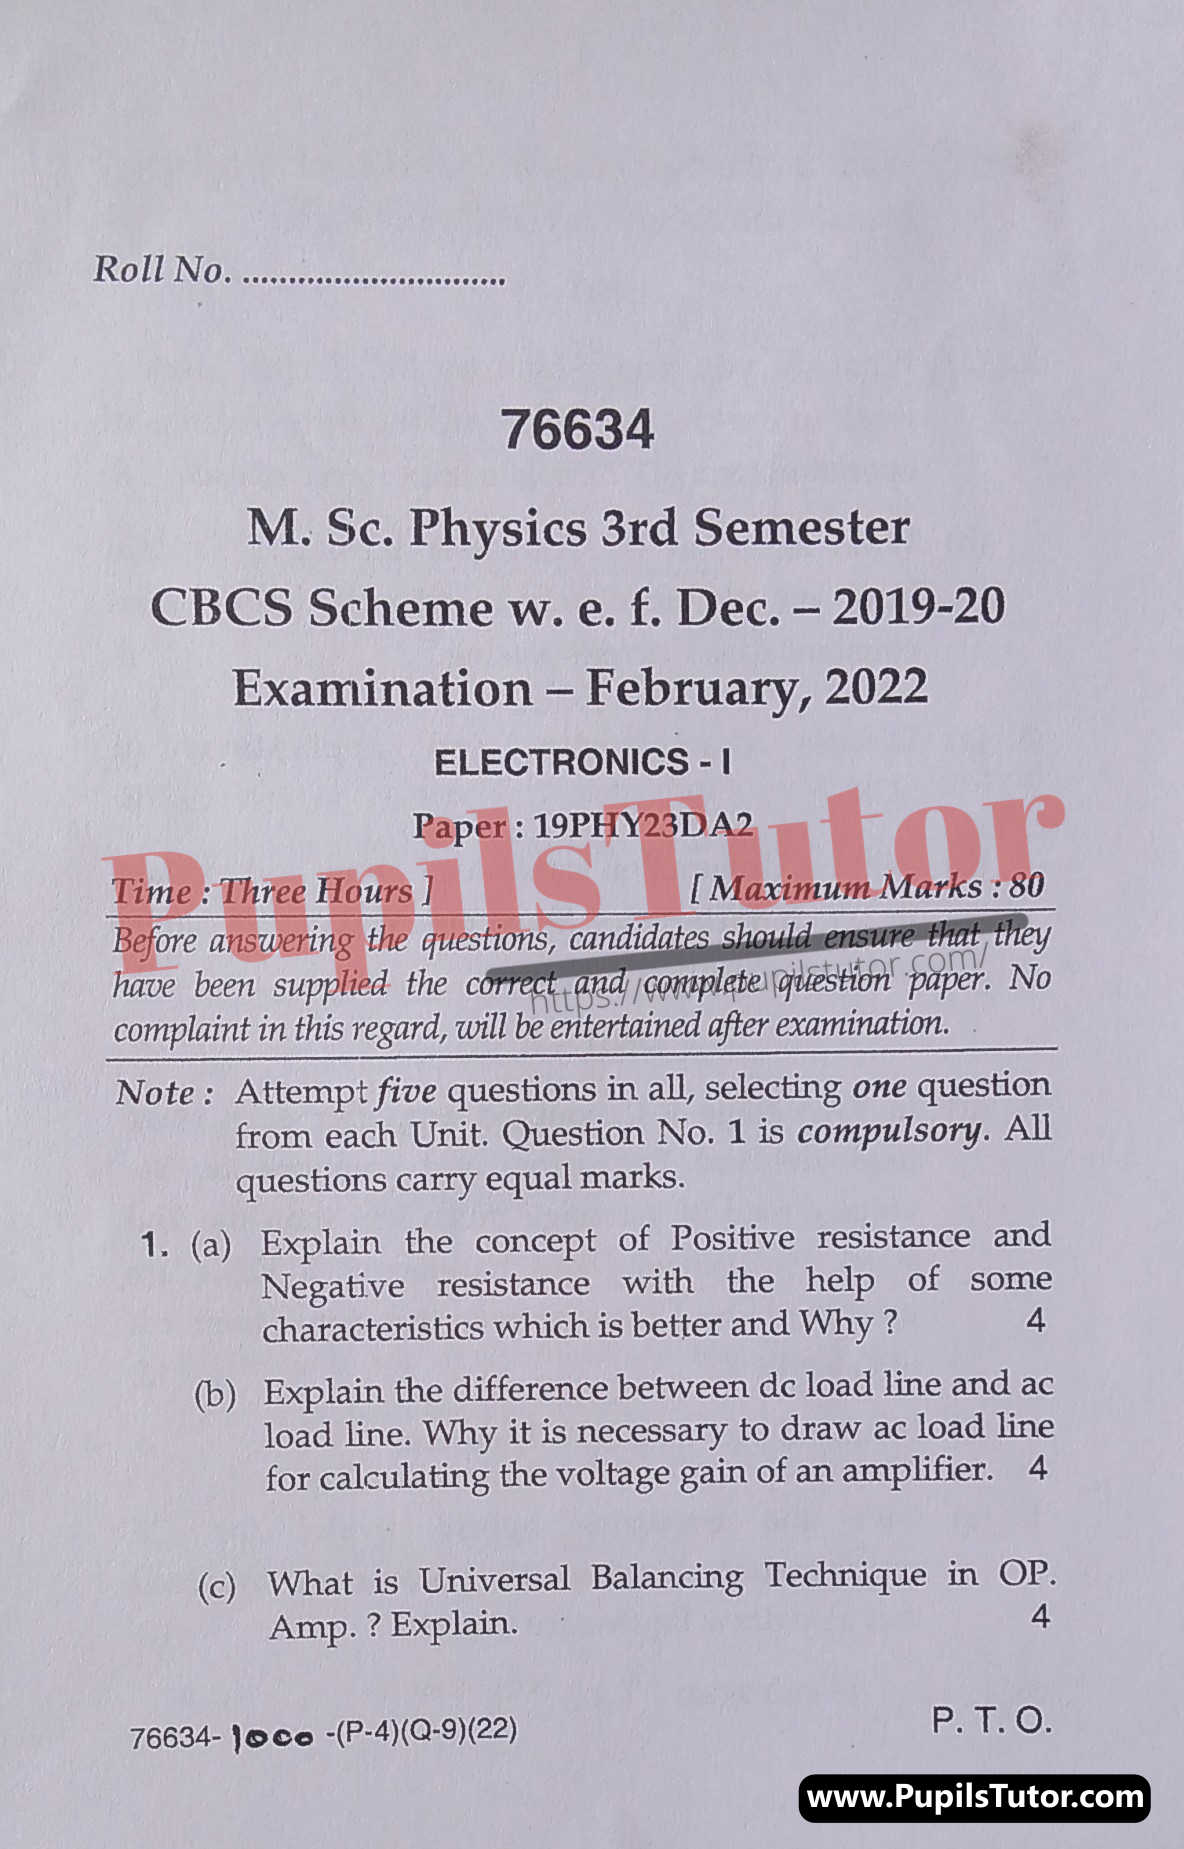 MDU (Maharshi Dayanand University, Rohtak Haryana) MSc Physics CBCS Scheme Third Semester Previous Year Electronics Question Paper For February, 2022 Exam (Question Paper Page 1) - pupilstutor.com